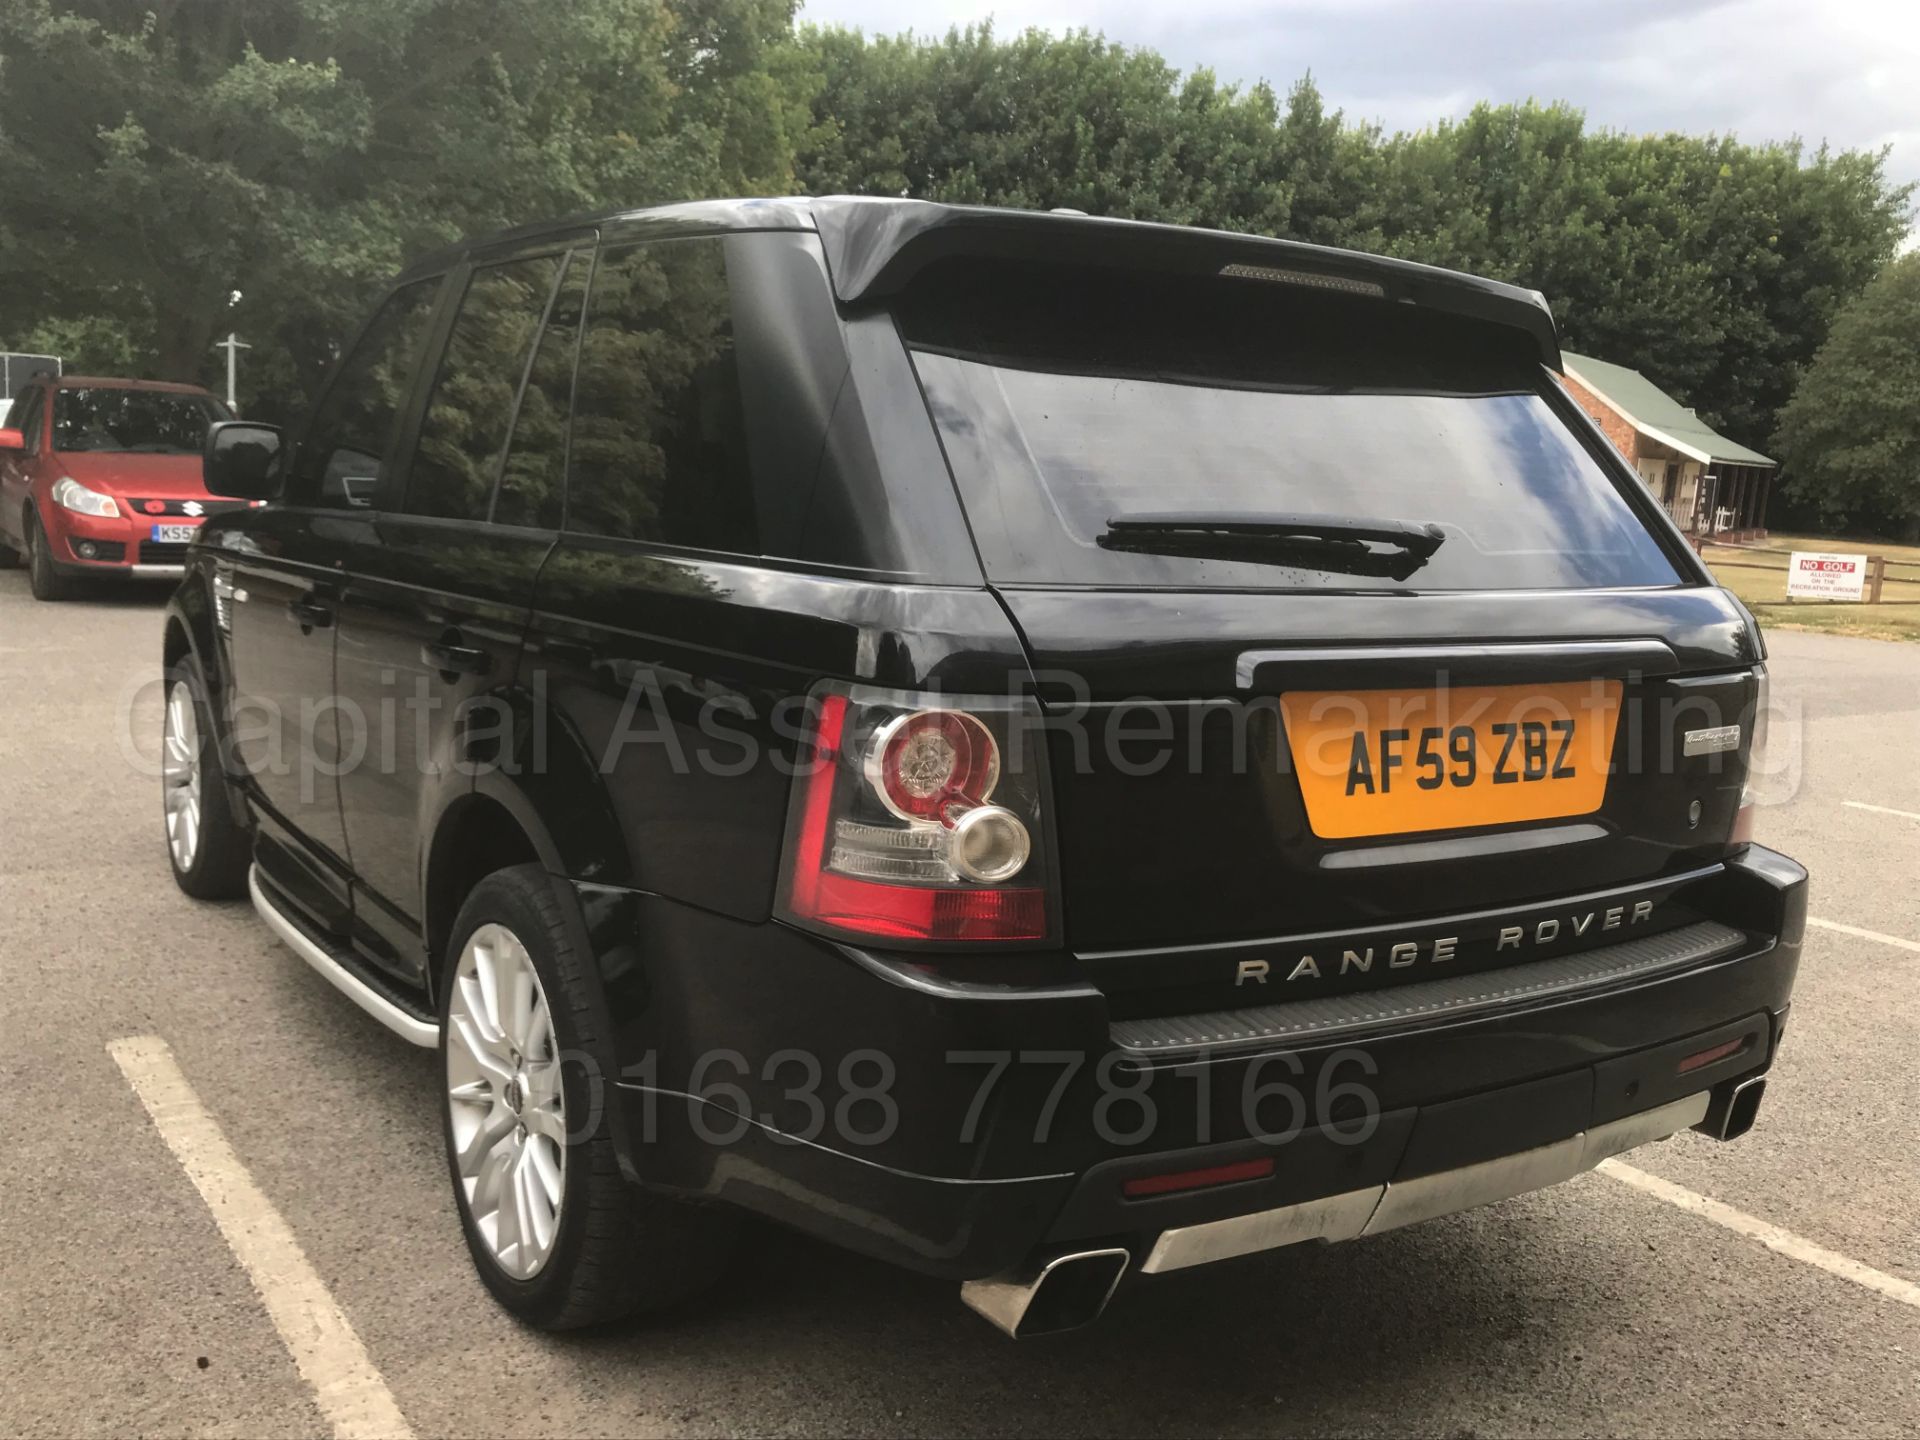 (On Sale) RANGE ROVER SPORT *HSE EDITION* (2010 MODEL) '3.0 TDV6 - 245 BHP - AUTO' **FULLY LOADED** - Image 8 of 44